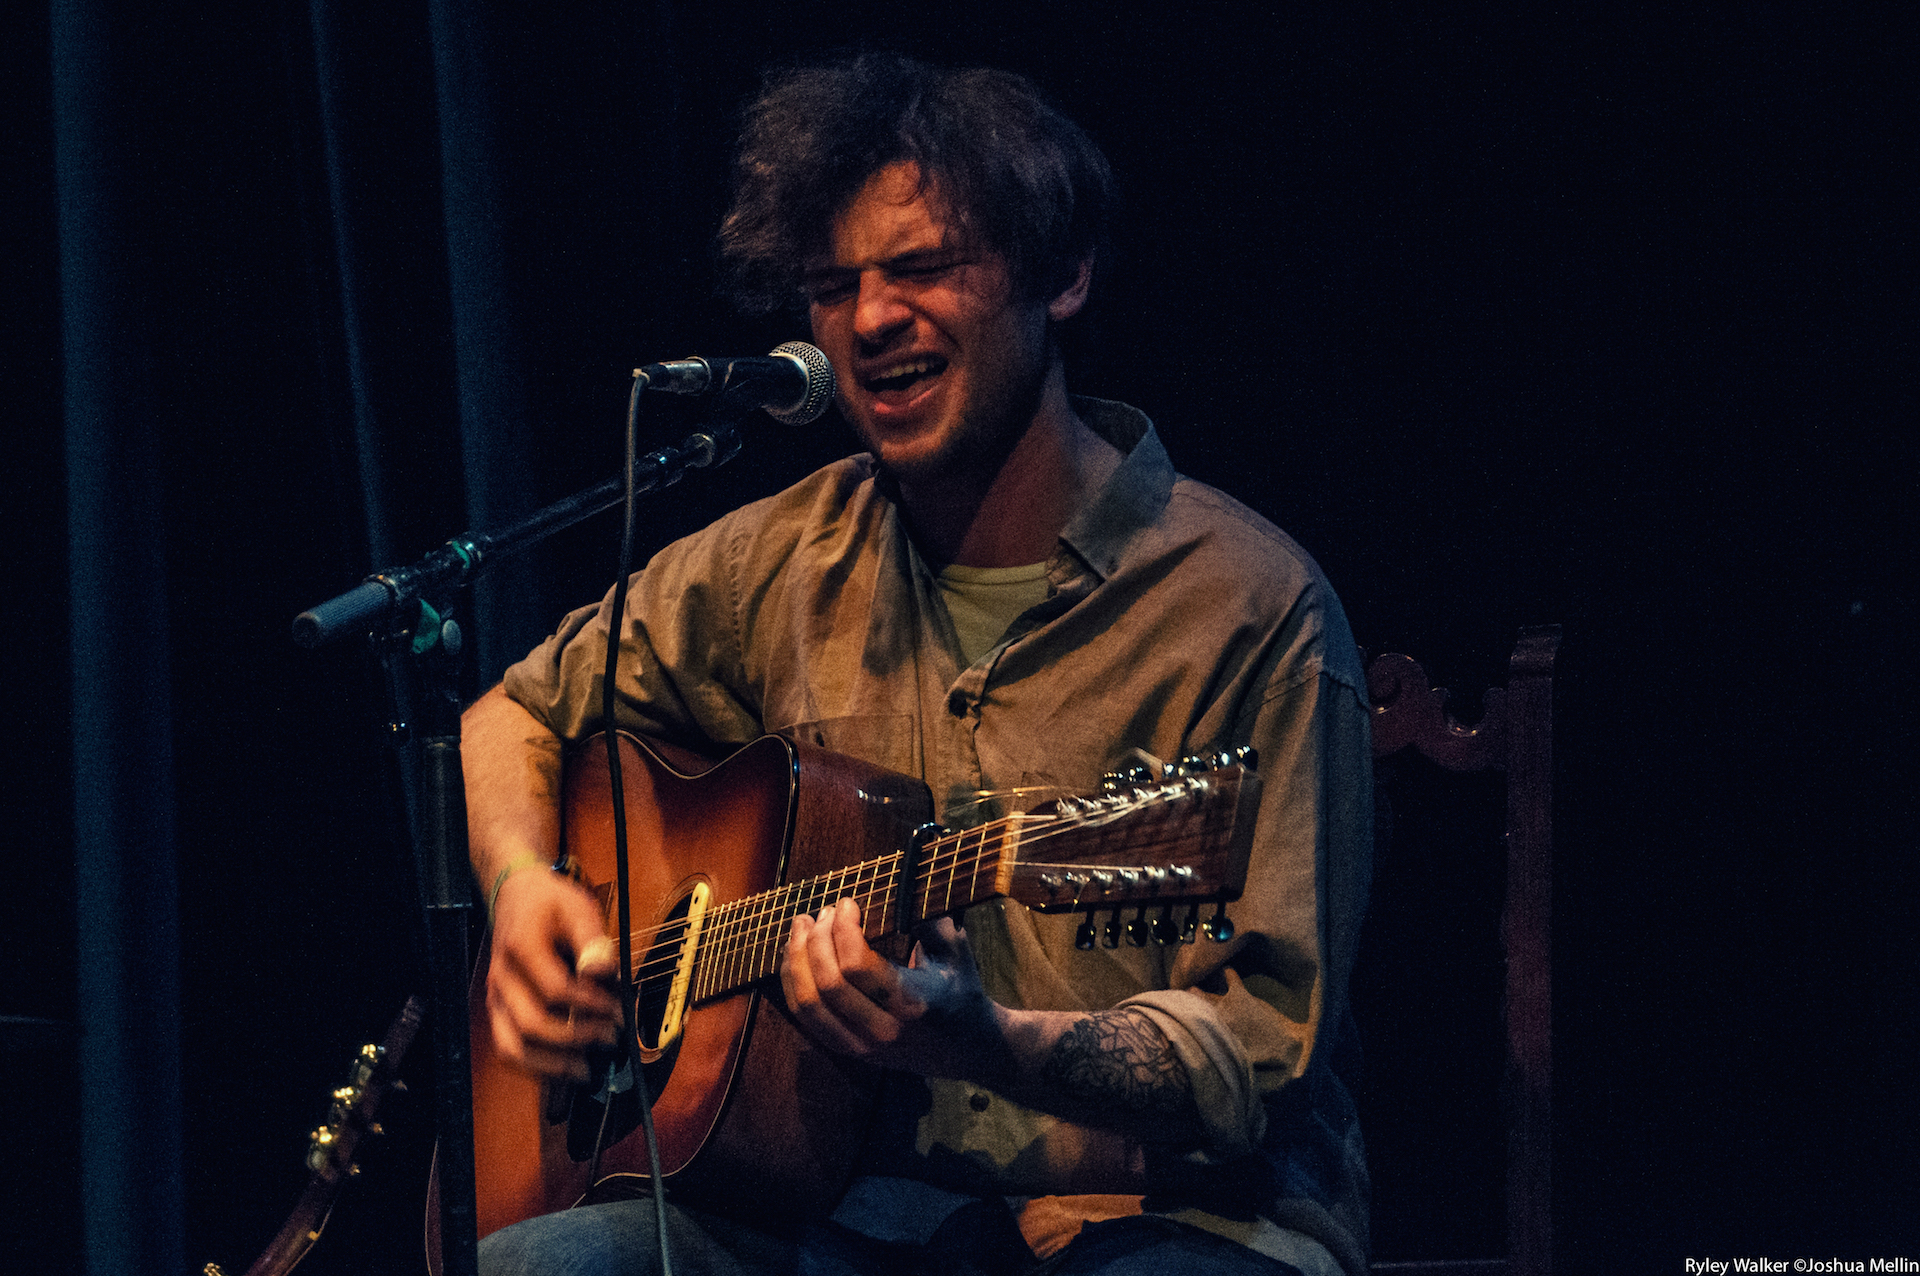 Check Out Photos of Ryley Walker at Chopin Theatre in Chicago, Illinois